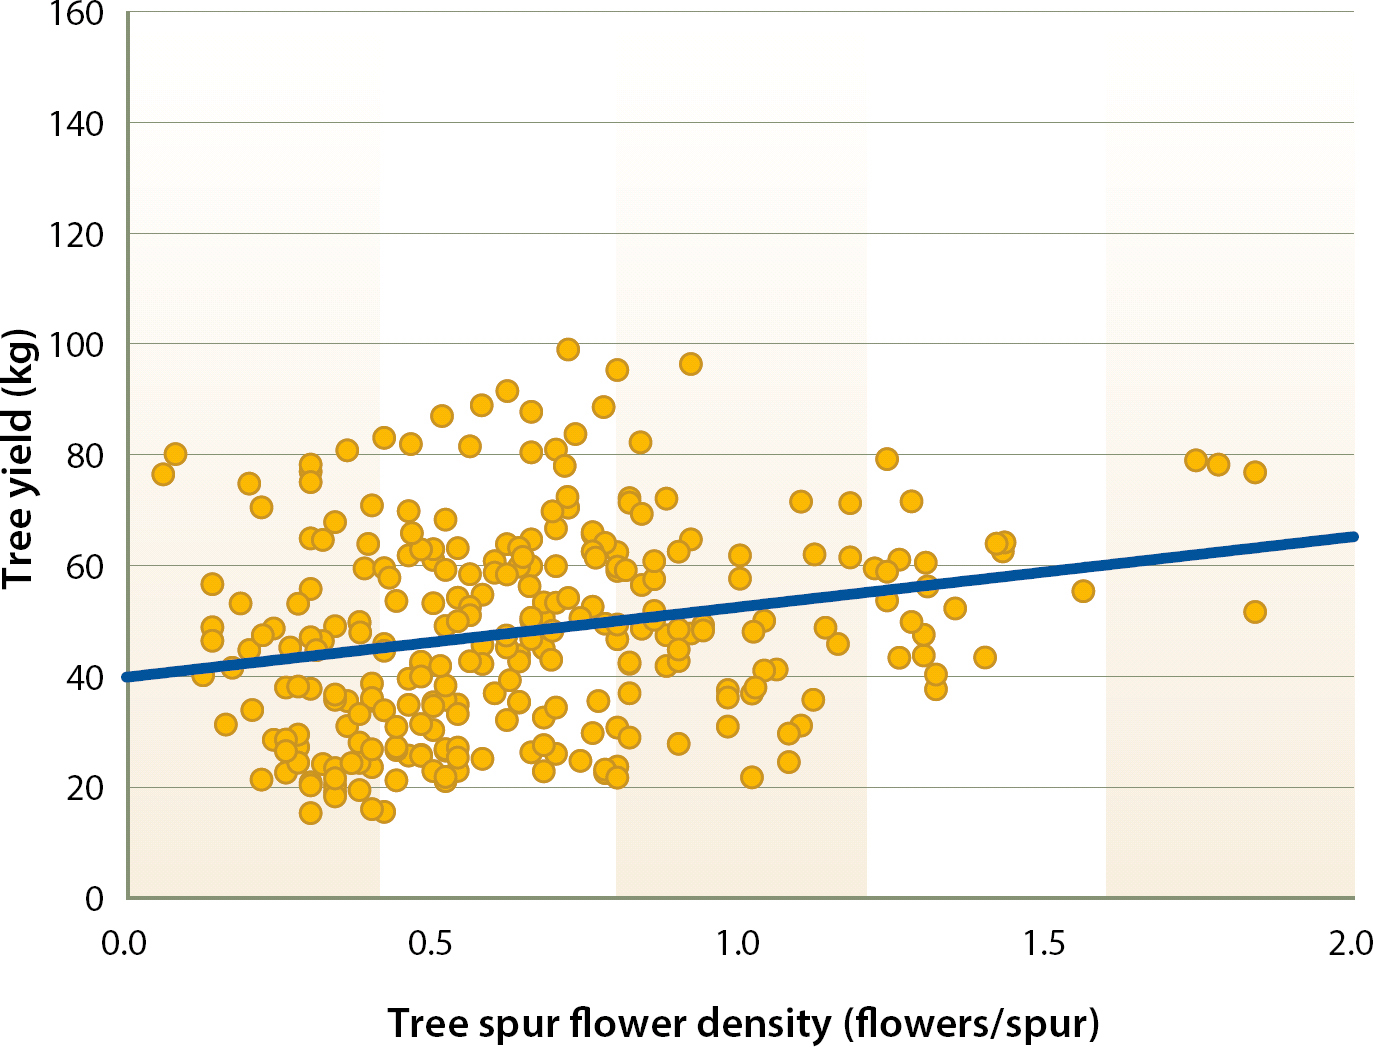 Relationship between tree kernel yield and tree tagged spur flower density from 2002 to 2007. (R2 = 0.053 P < 0.0001). 1 kg = 2.2 lb.